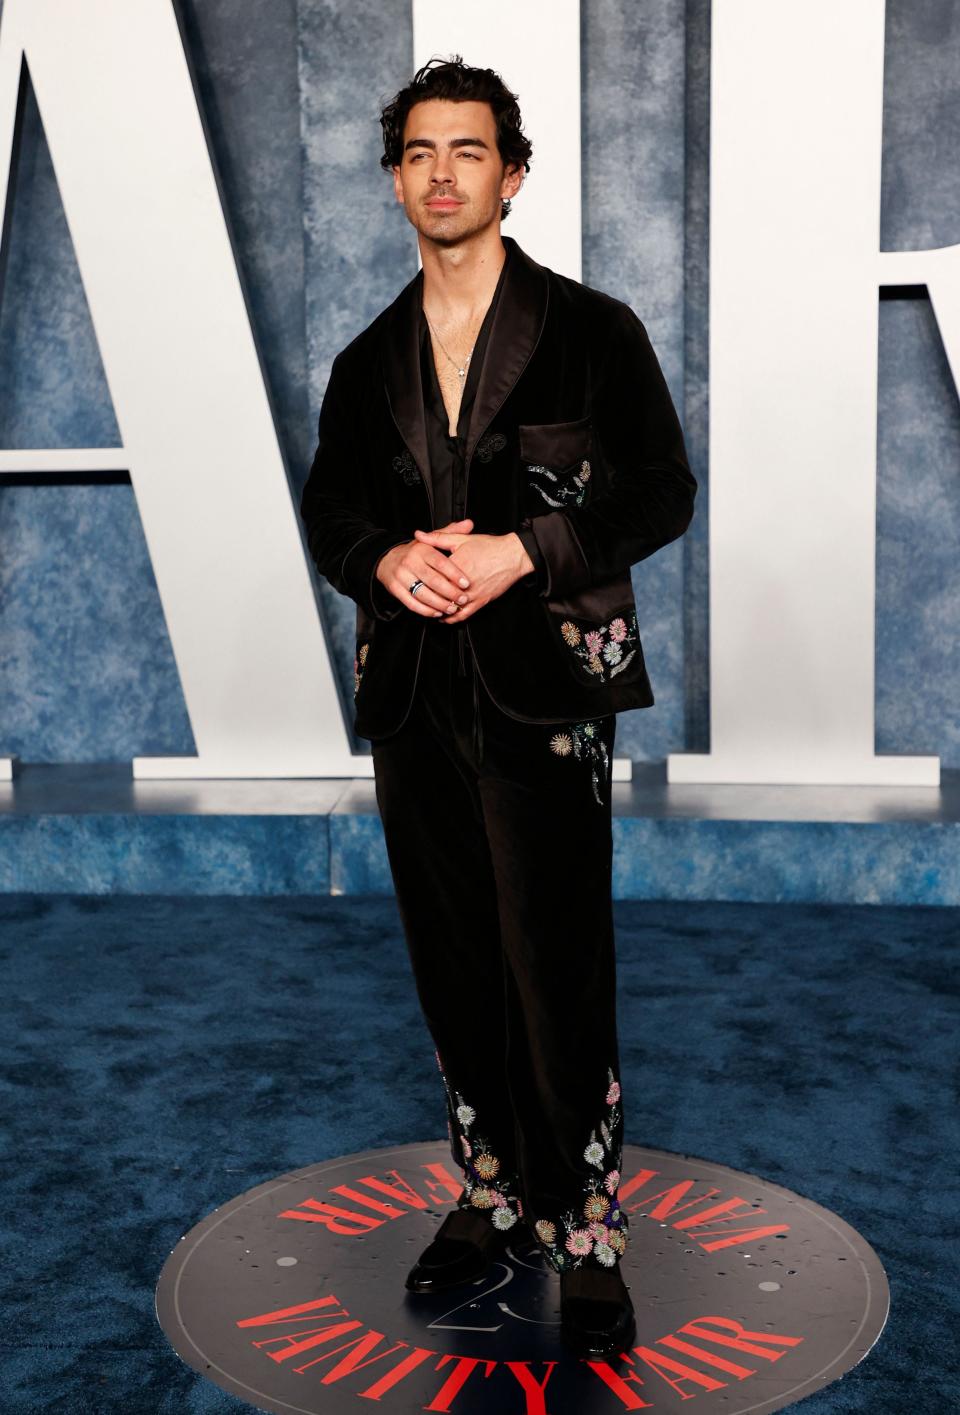 US singer Joe Jonas attends the Vanity Fair 95th Oscars Party at the The Wallis Annenberg Center for the Performing Arts in Beverly Hills, California on March 12, 2023. (Photo by Michael TRAN / AFP) (Photo by MICHAEL TRAN/AFP via Getty Images) ORIG FILE ID: AFP_33B92GR.jpg